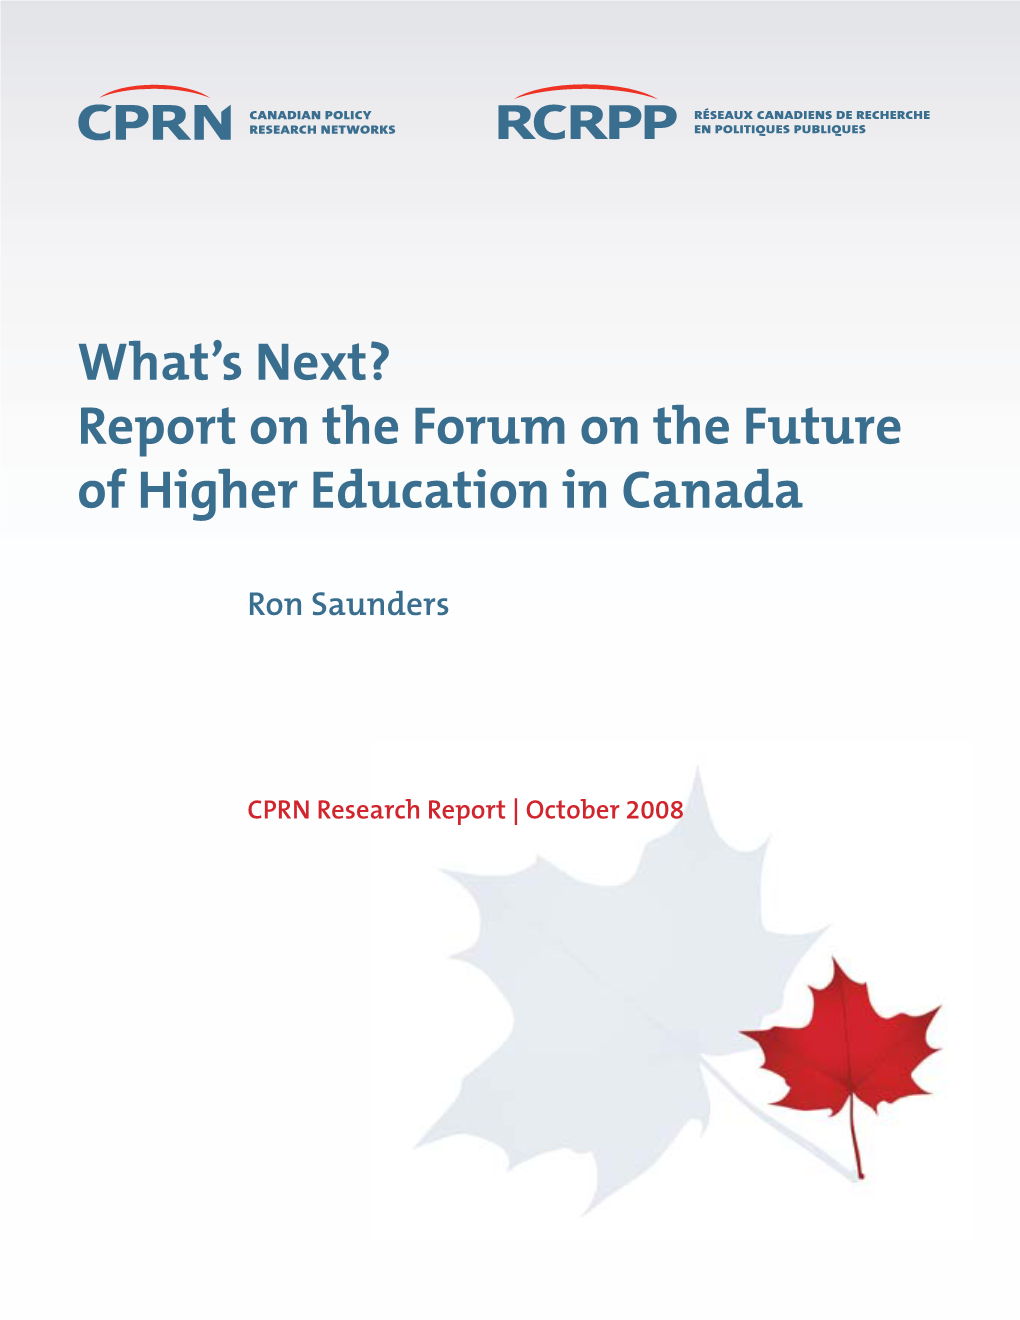 Report on the Forum on the Future of Higher Education in Canada